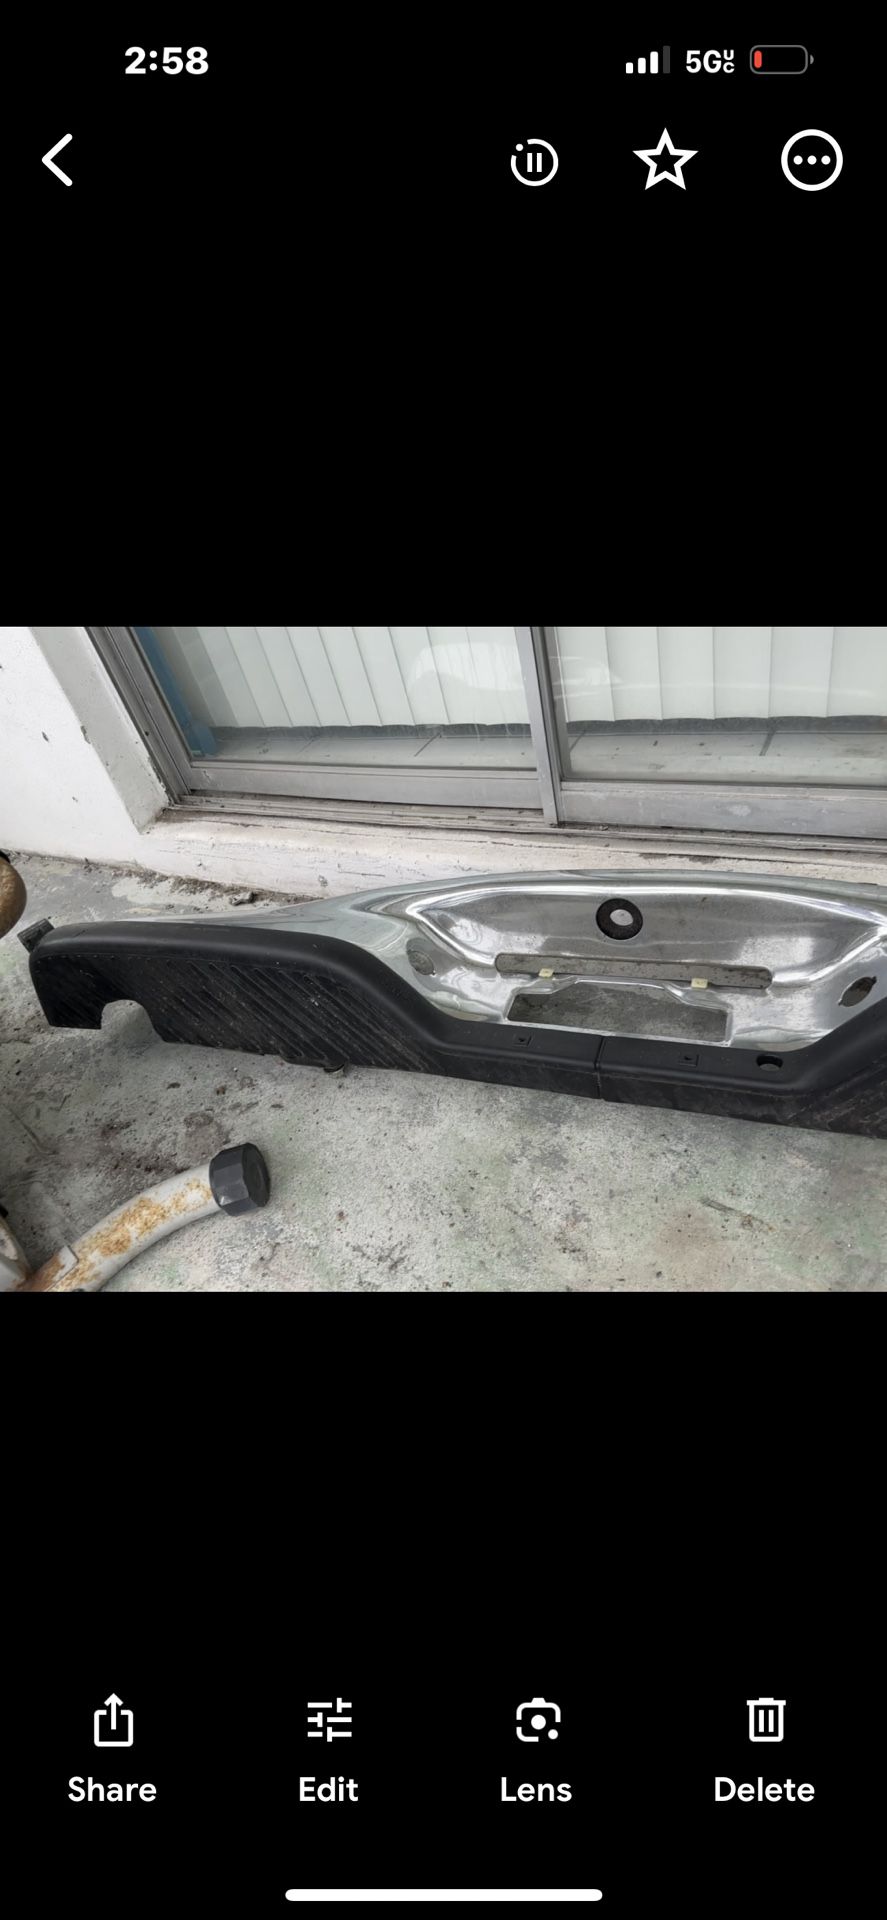 Ford Super Crew Accessories Bumper, And Side Floorboards